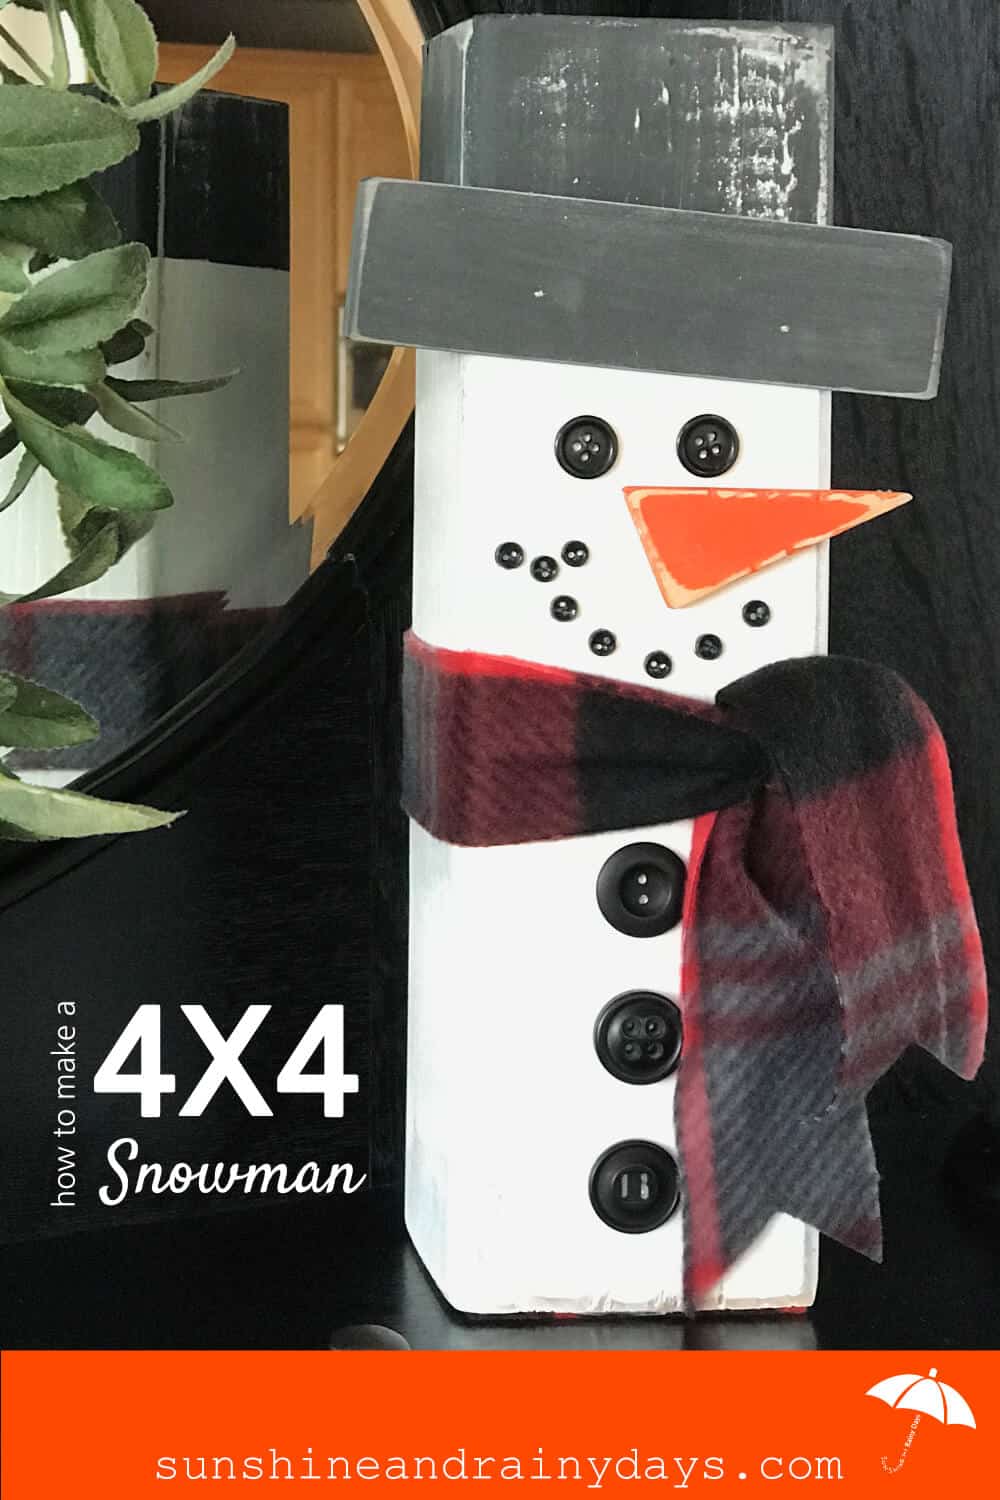 Snowman made out of a 4 x 4